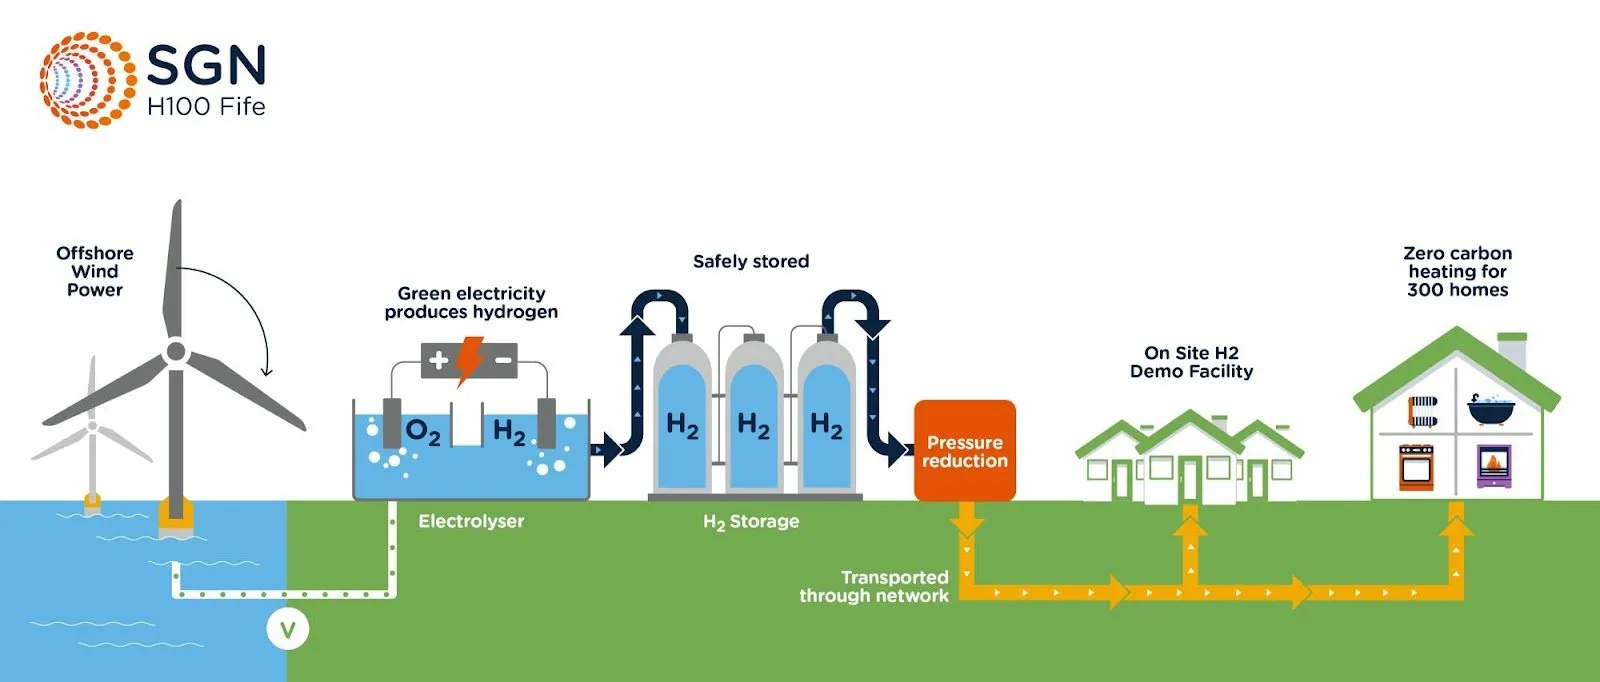 Infographic showing the transfer of offshore wind to hydrogen to be used in domestic heating.